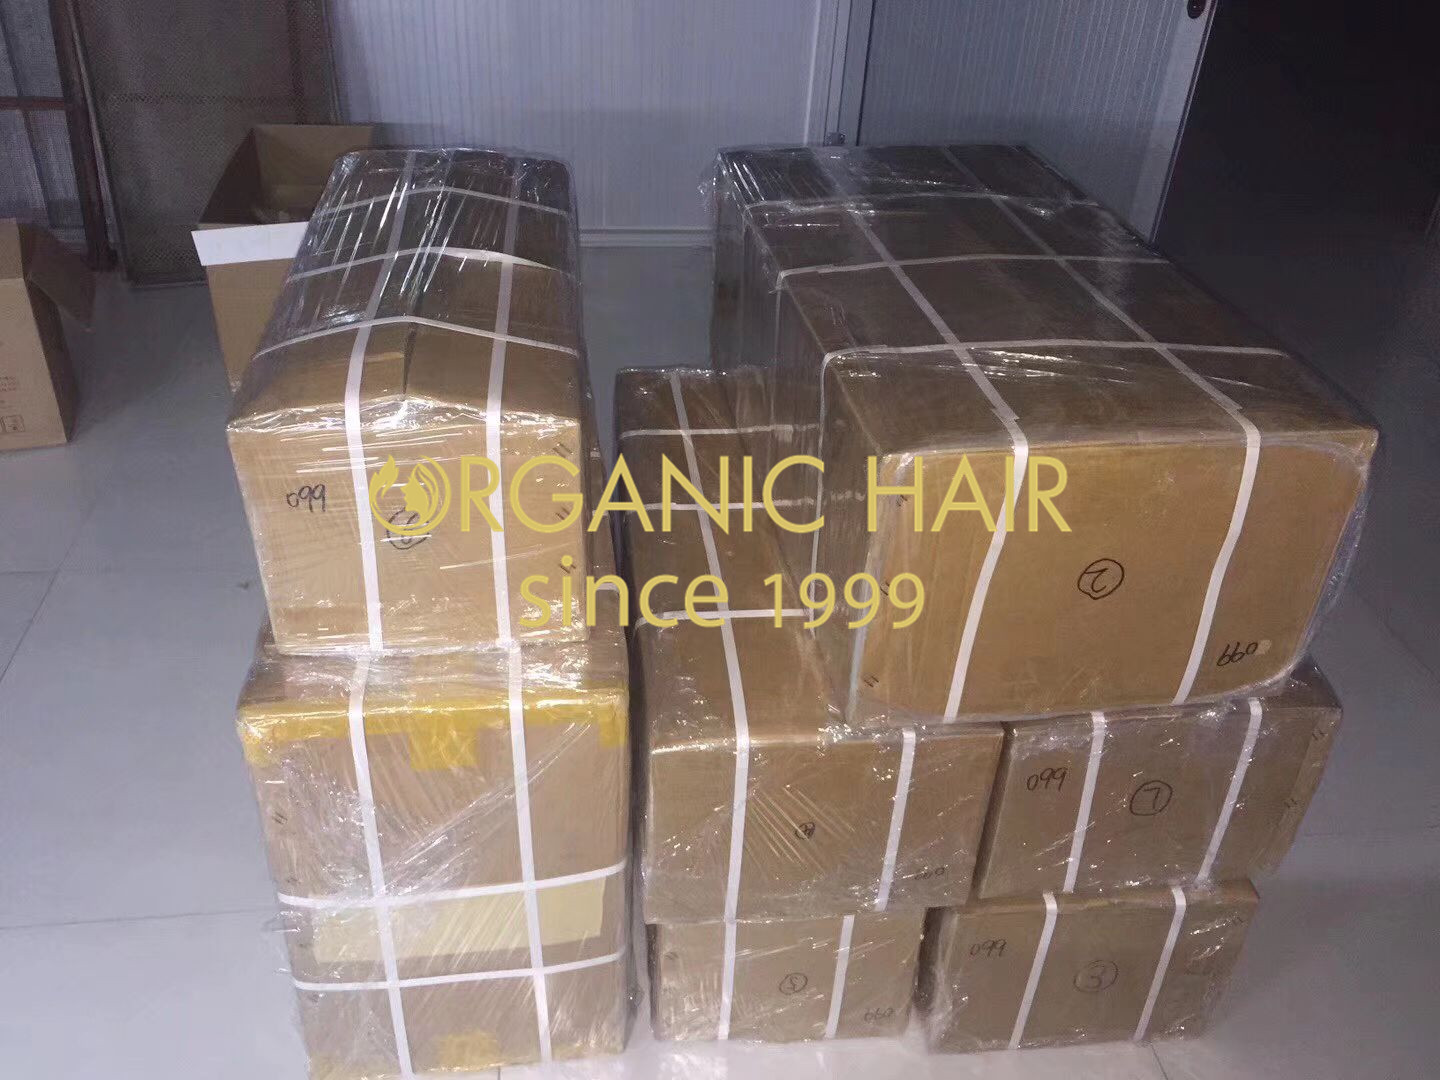 The SAS/STAT system provides customers fast service by preparing hair extension products large in stock h2  